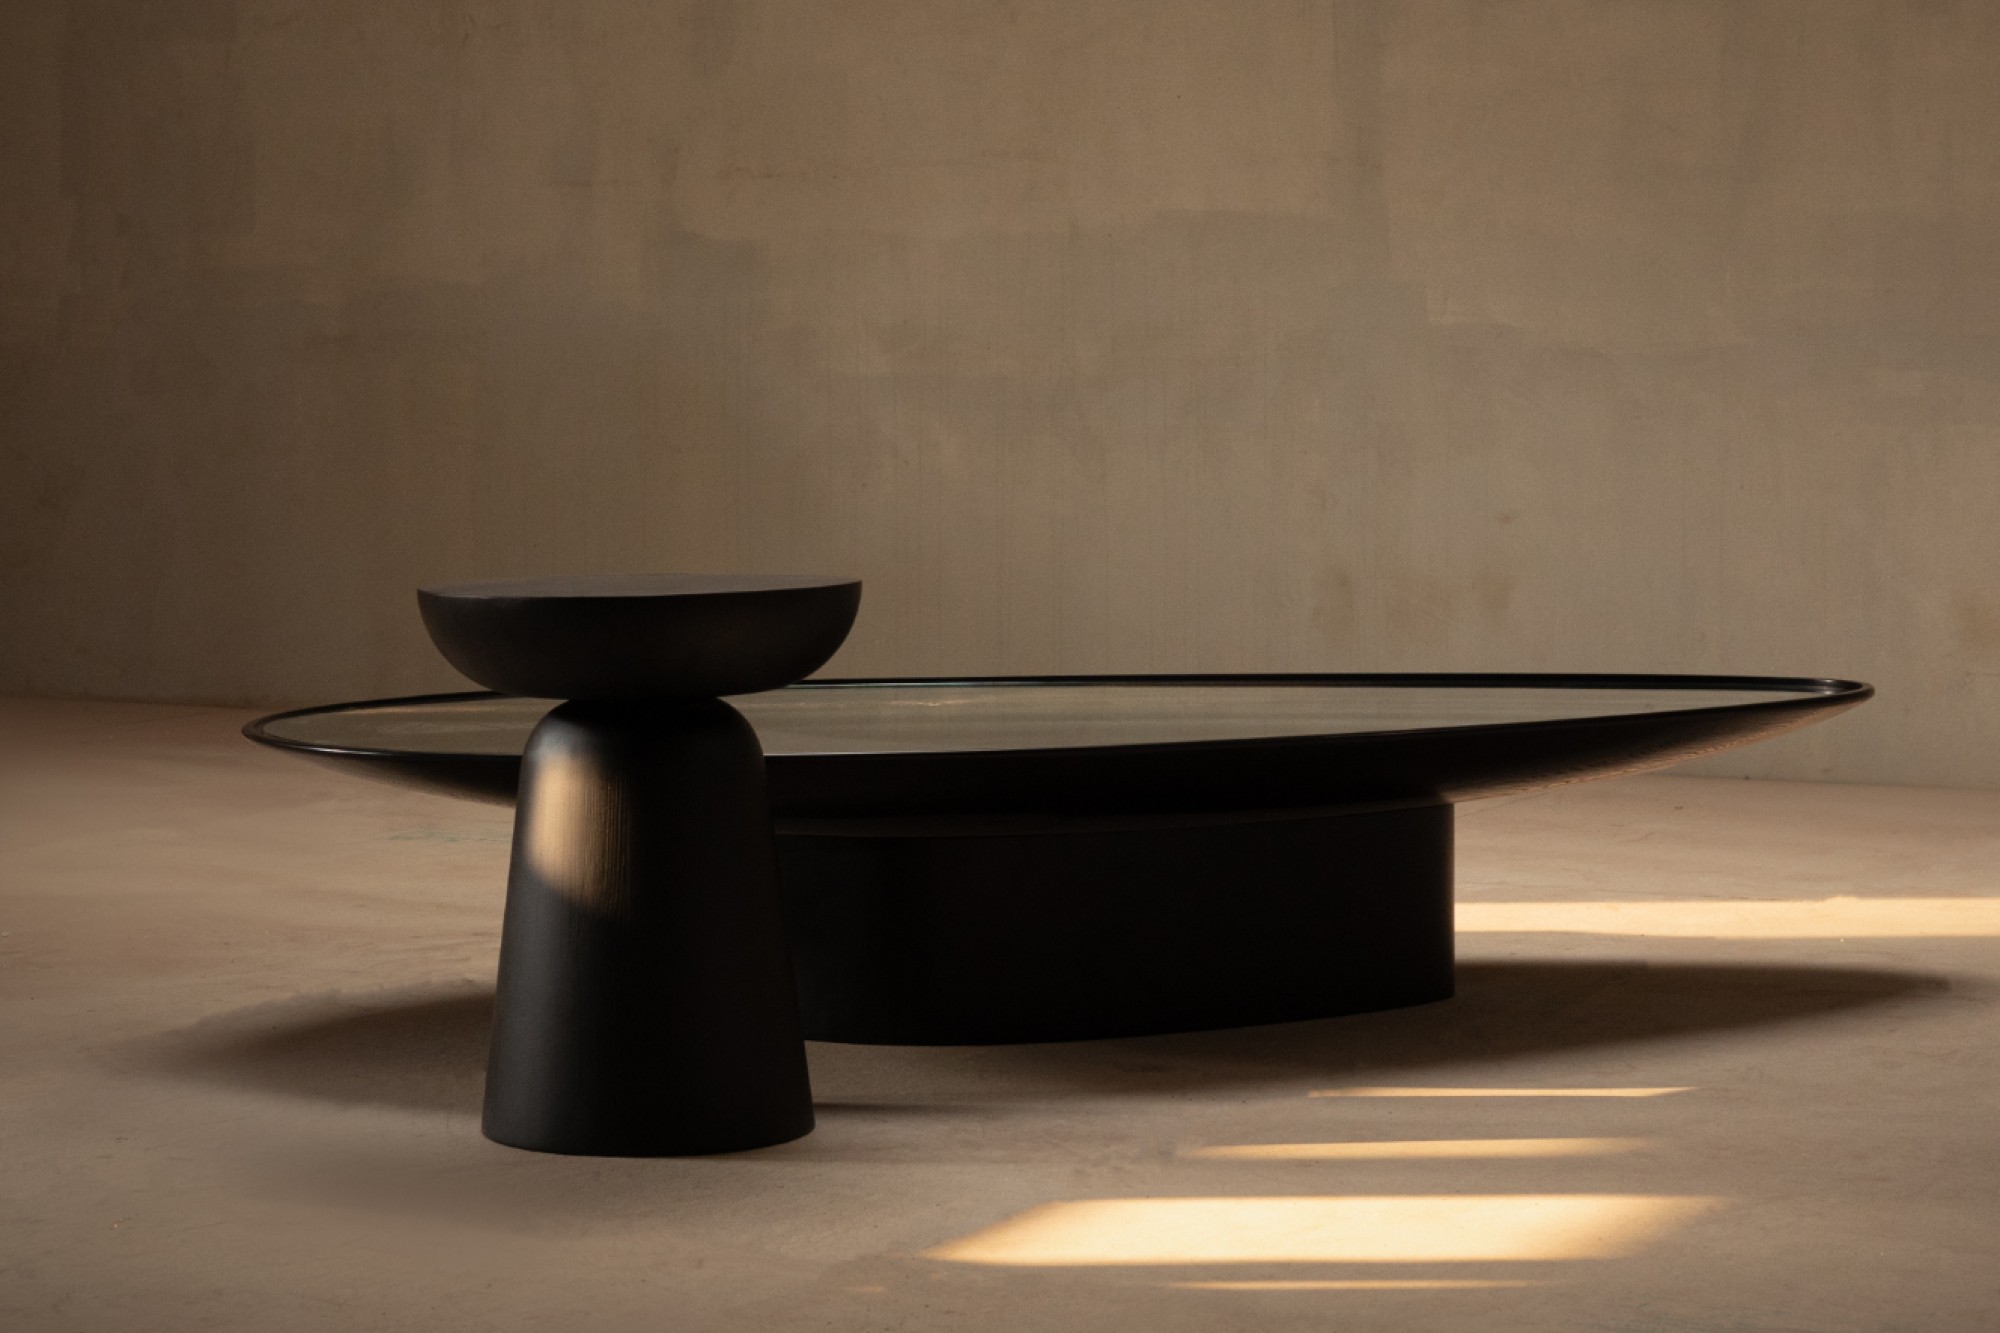 Creatomy unveils new table and console collection